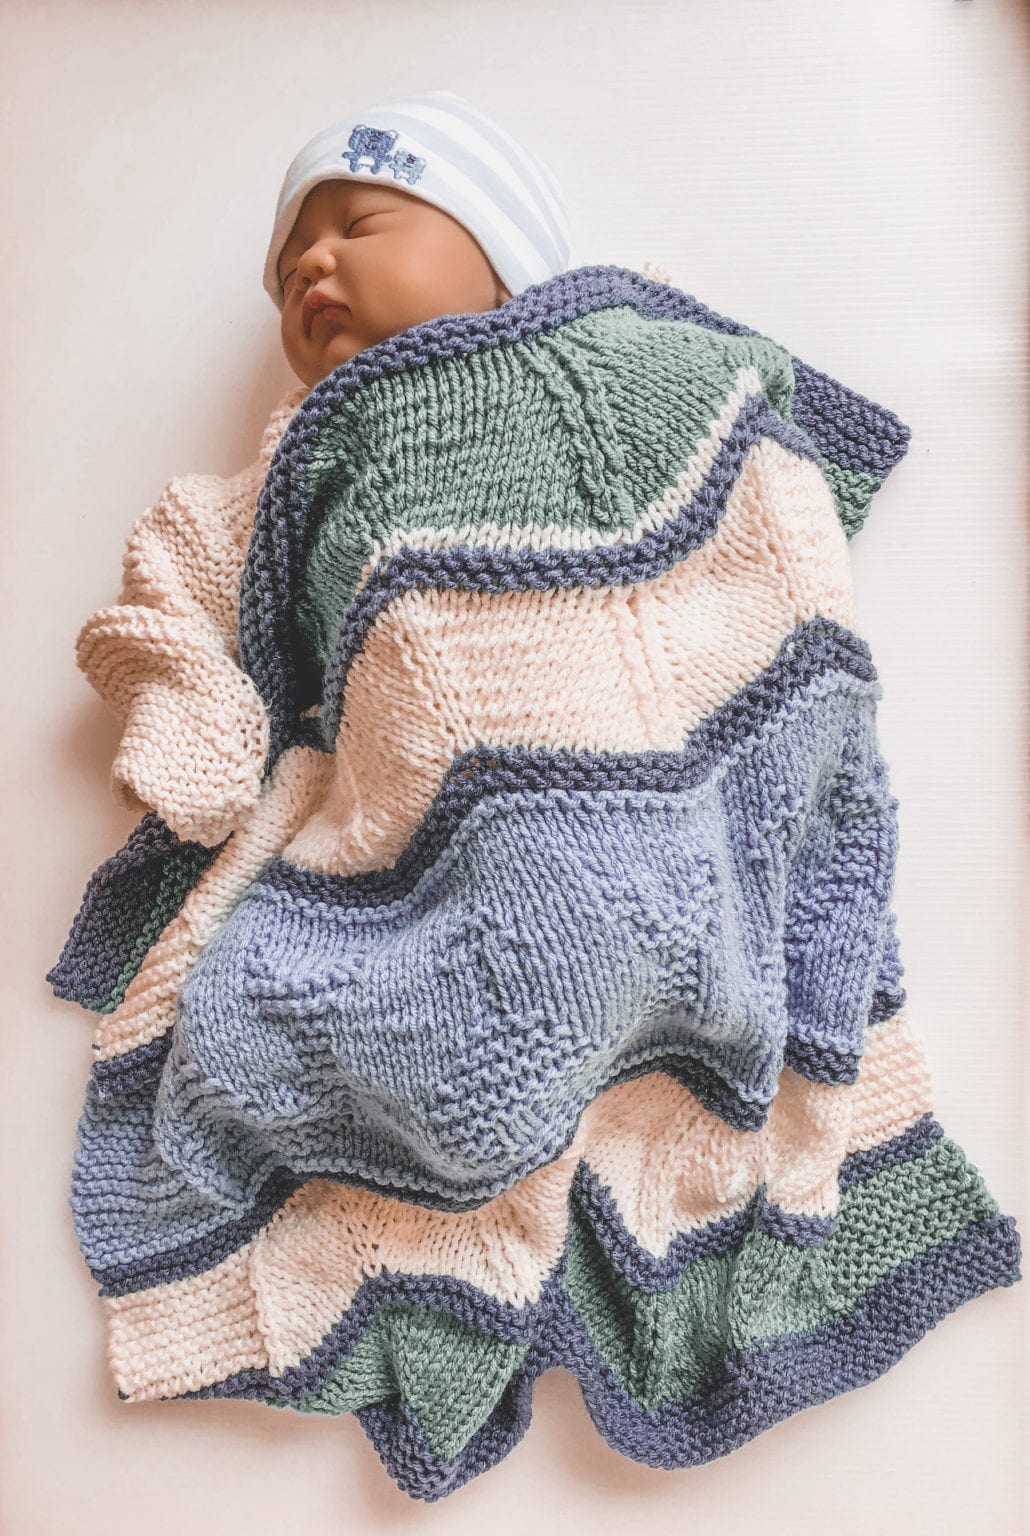 Whale Themed Baby Shower Knitting Pattern | candyloucreations knitting